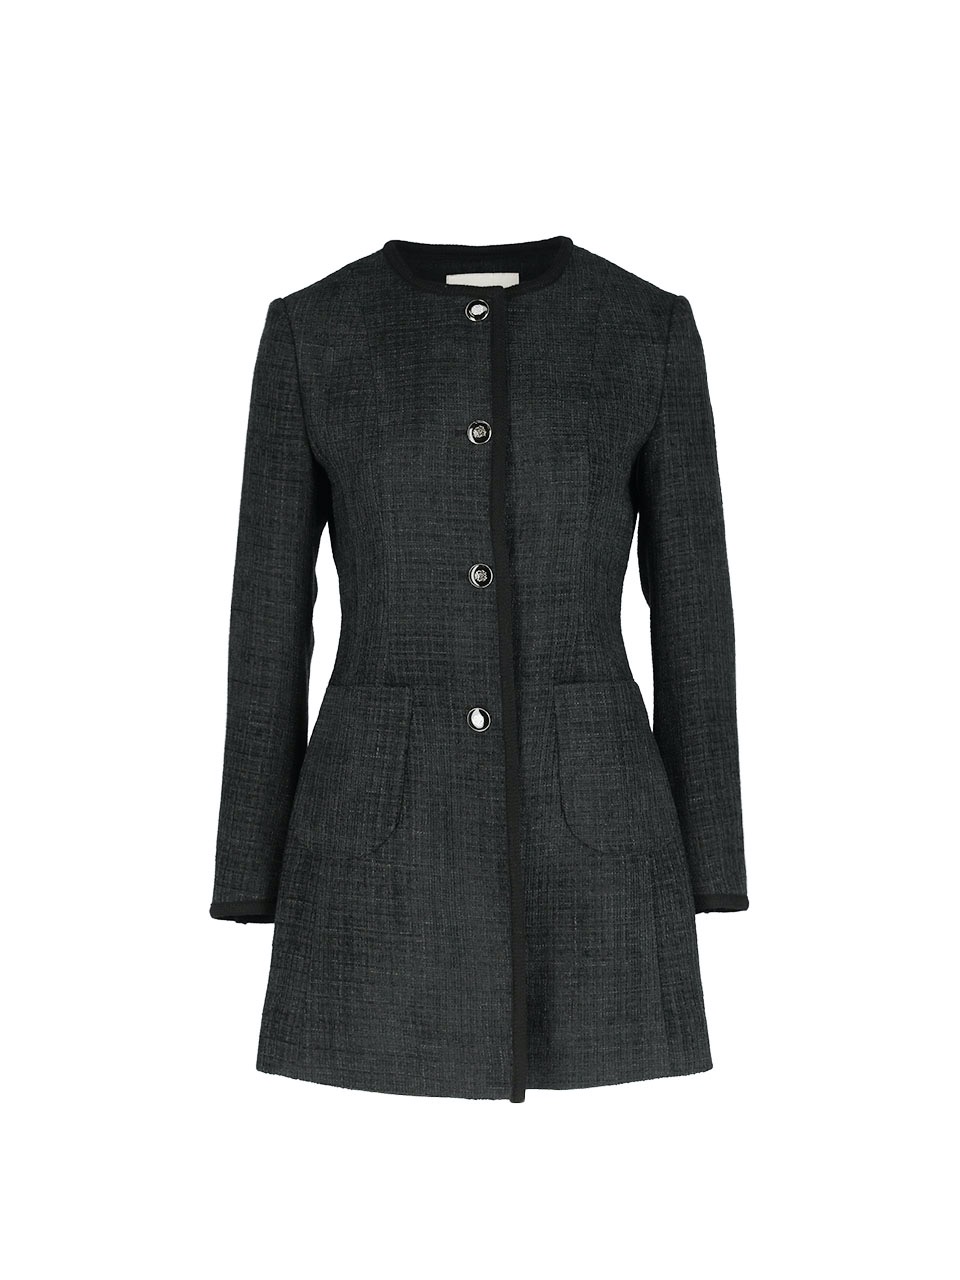 Structured Tailored Tweed long Jacket - Black